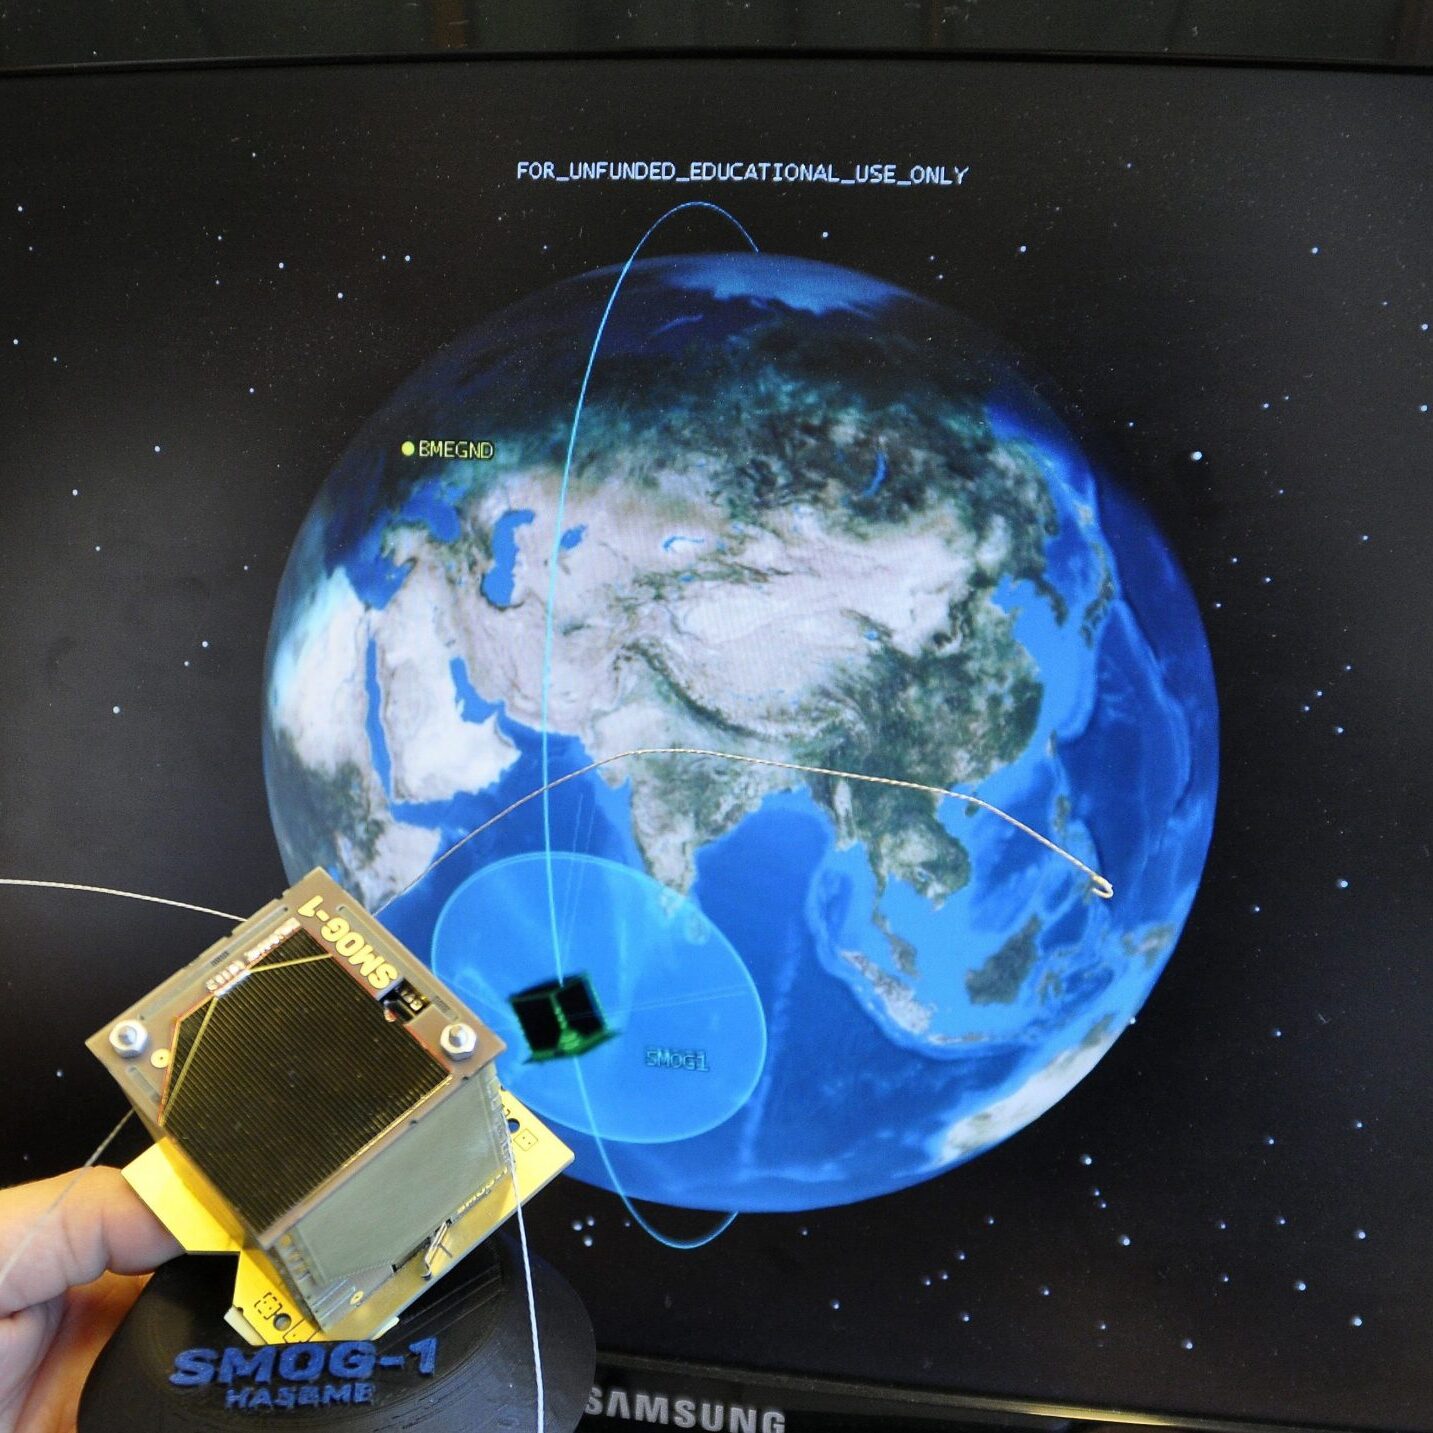 The fourth Hungarian small satellite, SMOG-1 has been launched